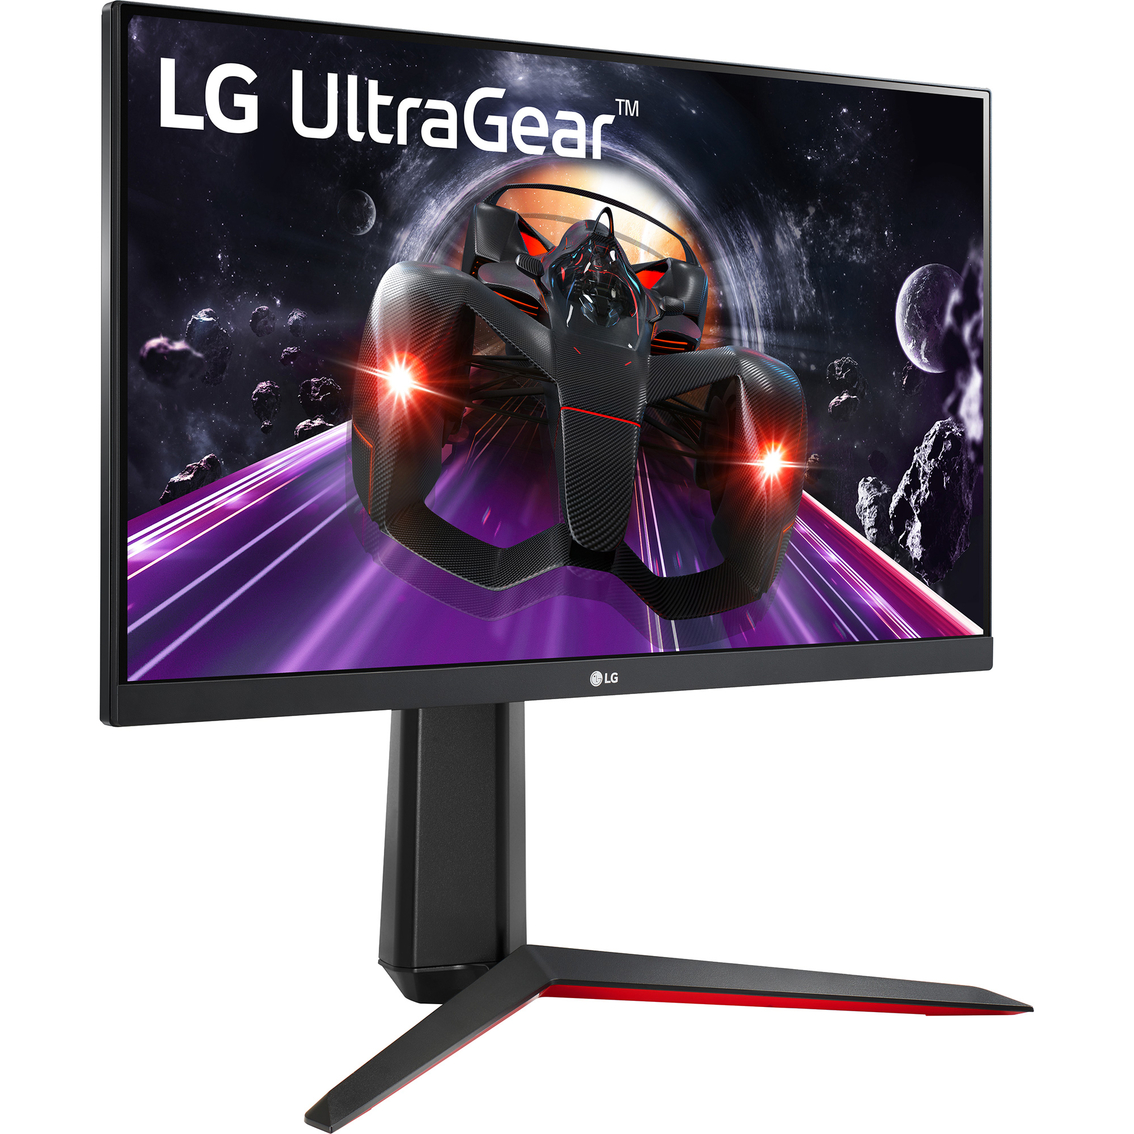 Lg Ultragear 24 In. 144hz Fhd Ips Hdr Gaming Monitor With Freesync